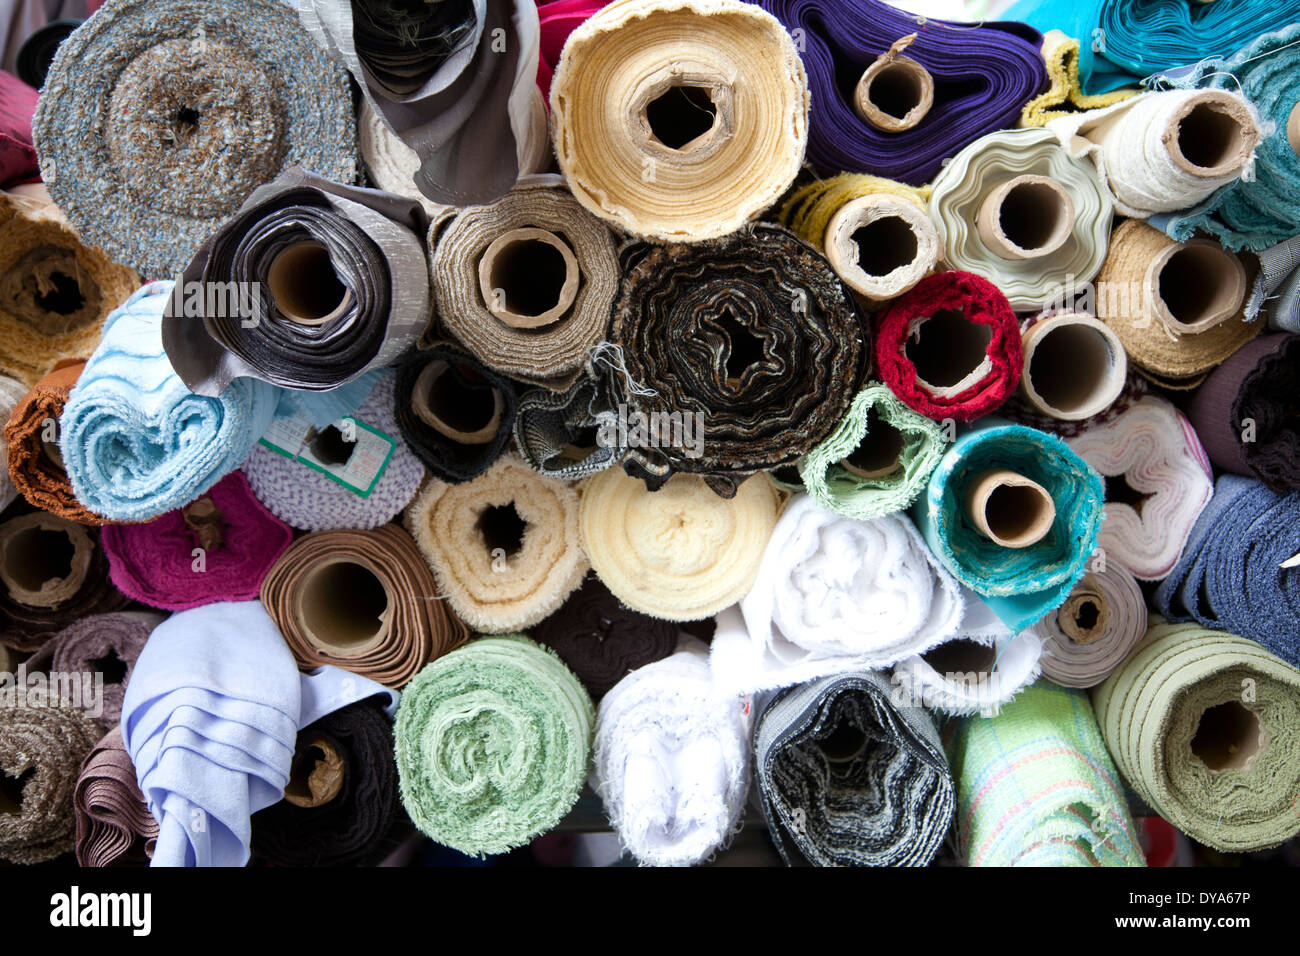 Colorful Fabrics In Warehouse. Rolls Of Fabrics For Sewing. Stock Photo,  Picture and Royalty Free Image. Image 121564787.